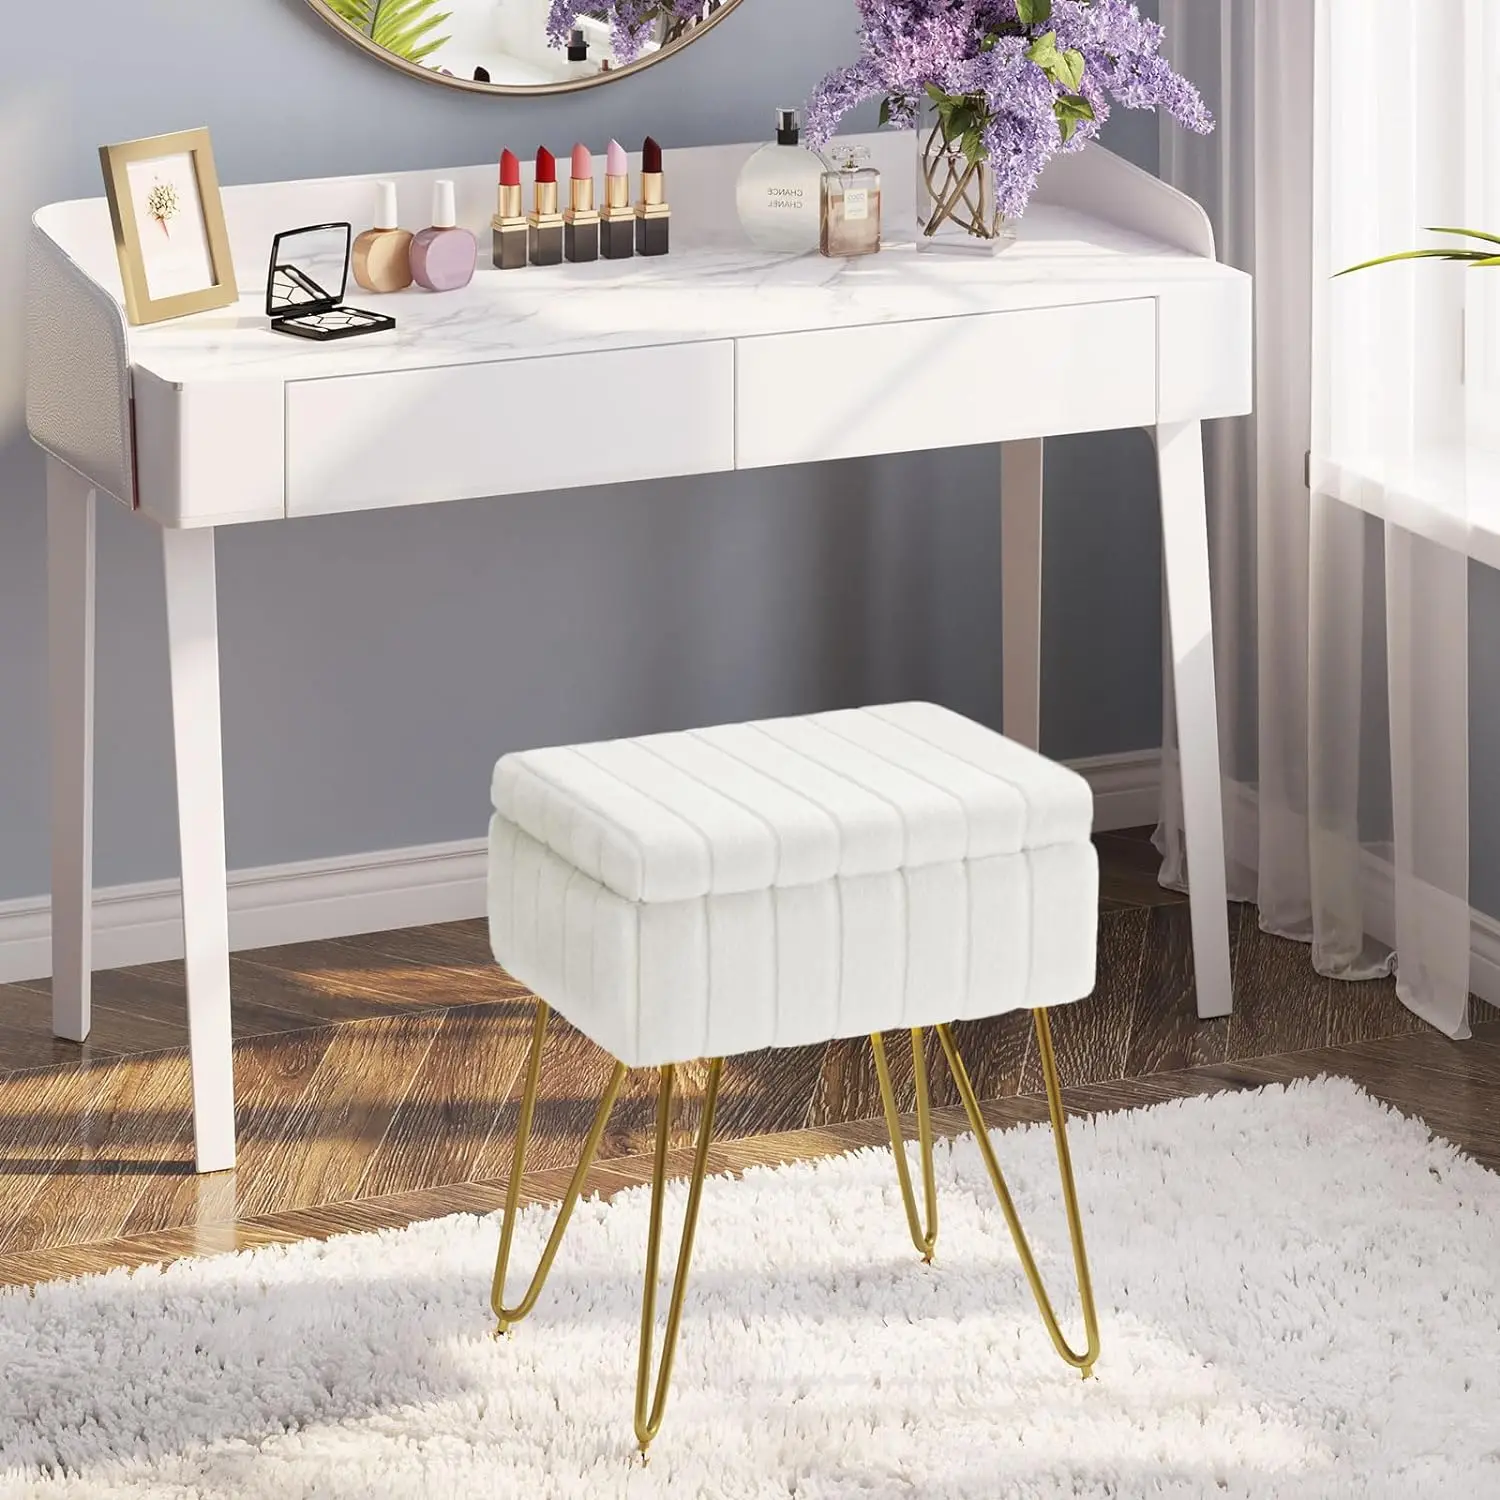 

Vanity Chair Faux Fur with Storage, 15.7"L x 11.8"W x 19.4"H Soft Ottoman 4 Metal Legs, Furry Padded Seat, Bedroom White